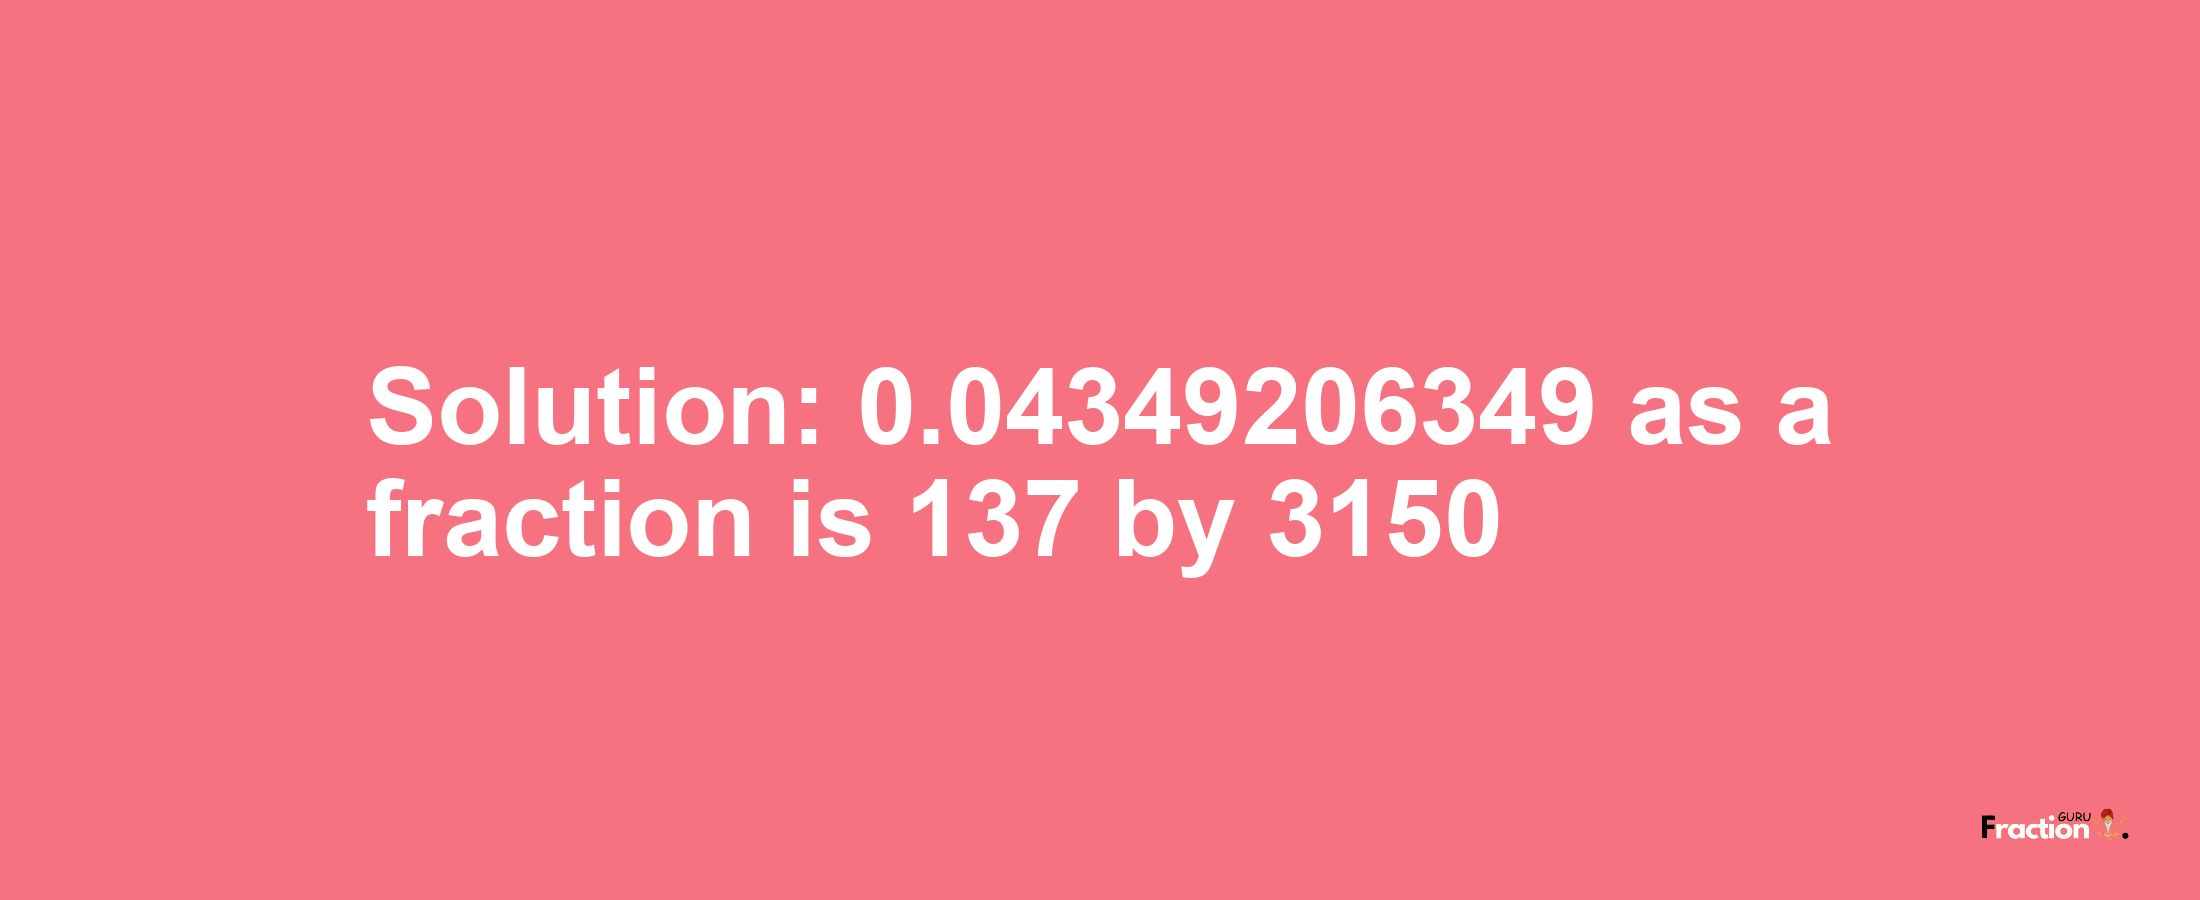 Solution:0.04349206349 as a fraction is 137/3150